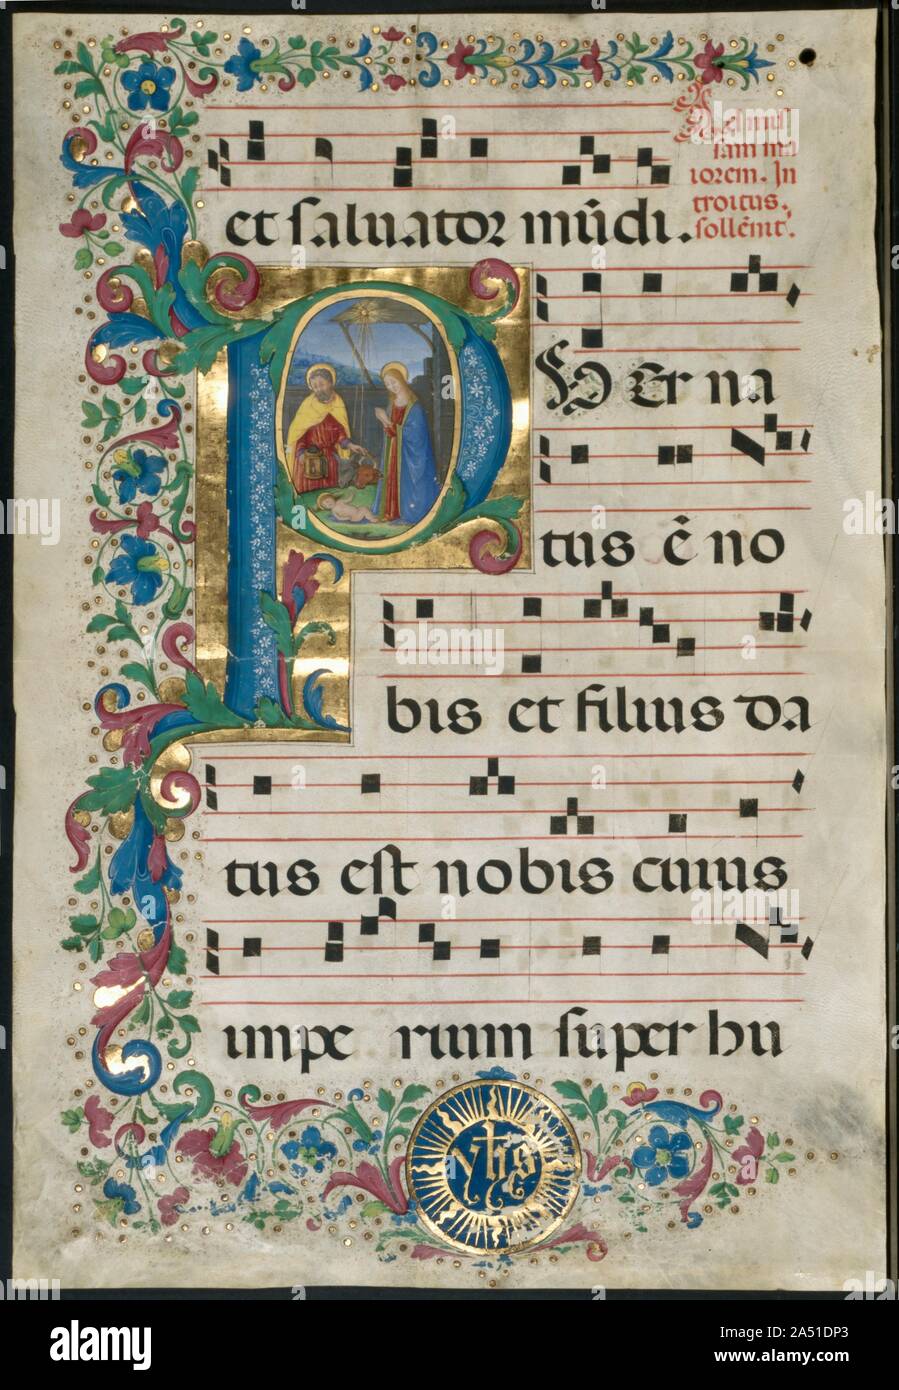 Leaf from a Gradual: Initial P with the Nativity, c. 1500. This beautiful initial P introduces the text Puer natus e[st] nobis, et filius datus est nobis (&quot;For a child is born to us, and a son is given to us&quot;) which marks the opening of the Introit for Christmas Day. The text, taken from Isaiah 9:6, continues, &quot;. . . and his name shall be called Wonderful.&quot; It is used to celebrate one of the most joyous events of the Christian Church&#x2014;the birth of Christ. This splendid leaf from a manuscript gradual contains the chants used for solemn high Mass on Christmas Day. The i Stock Photo